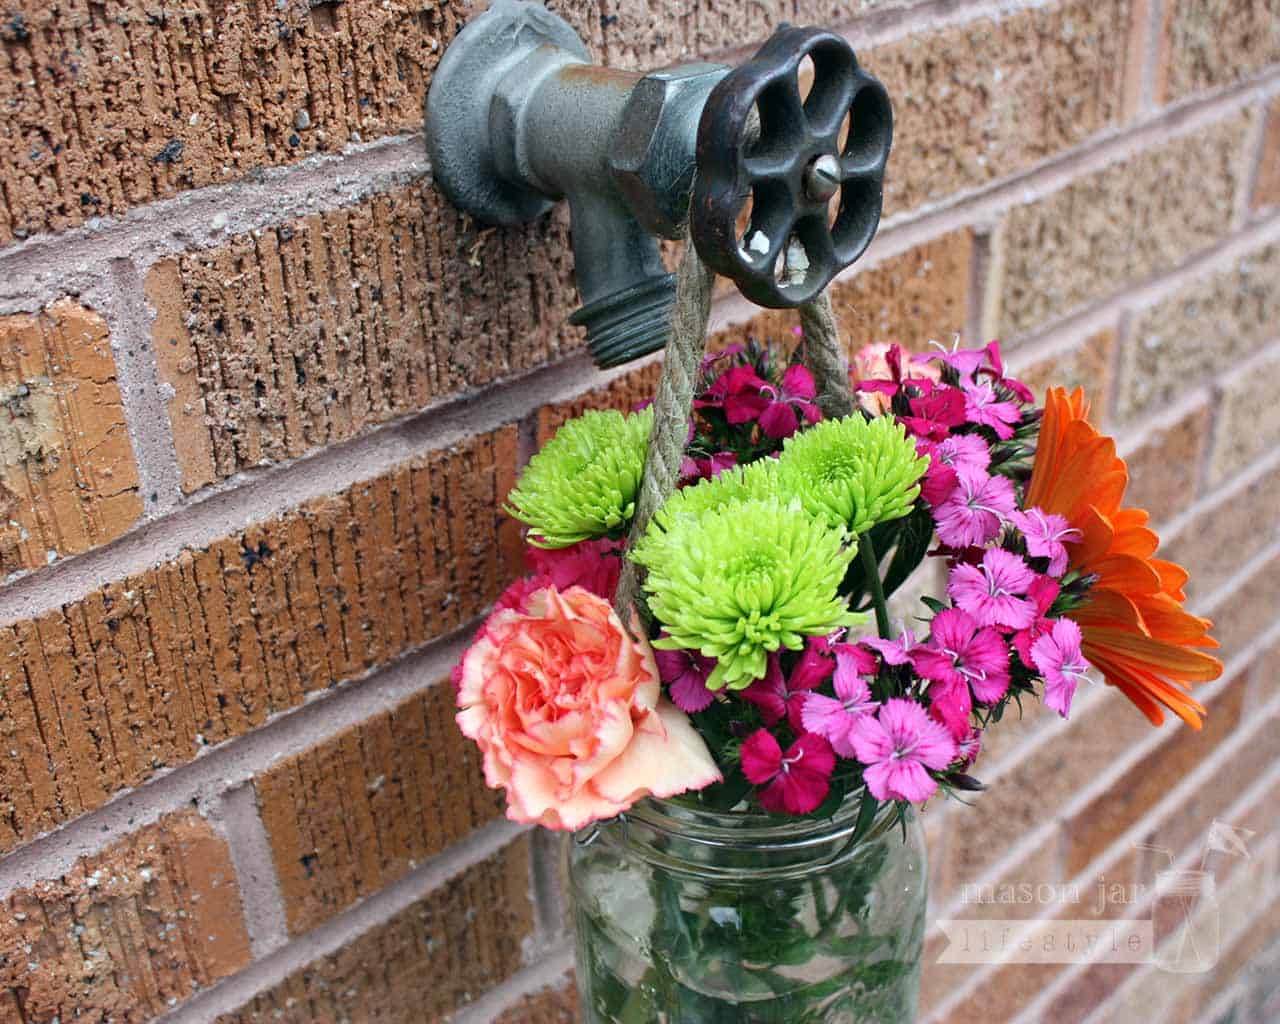 Thin rope handle on wide mouth quart Mason jar with flowers hanging on water faucet